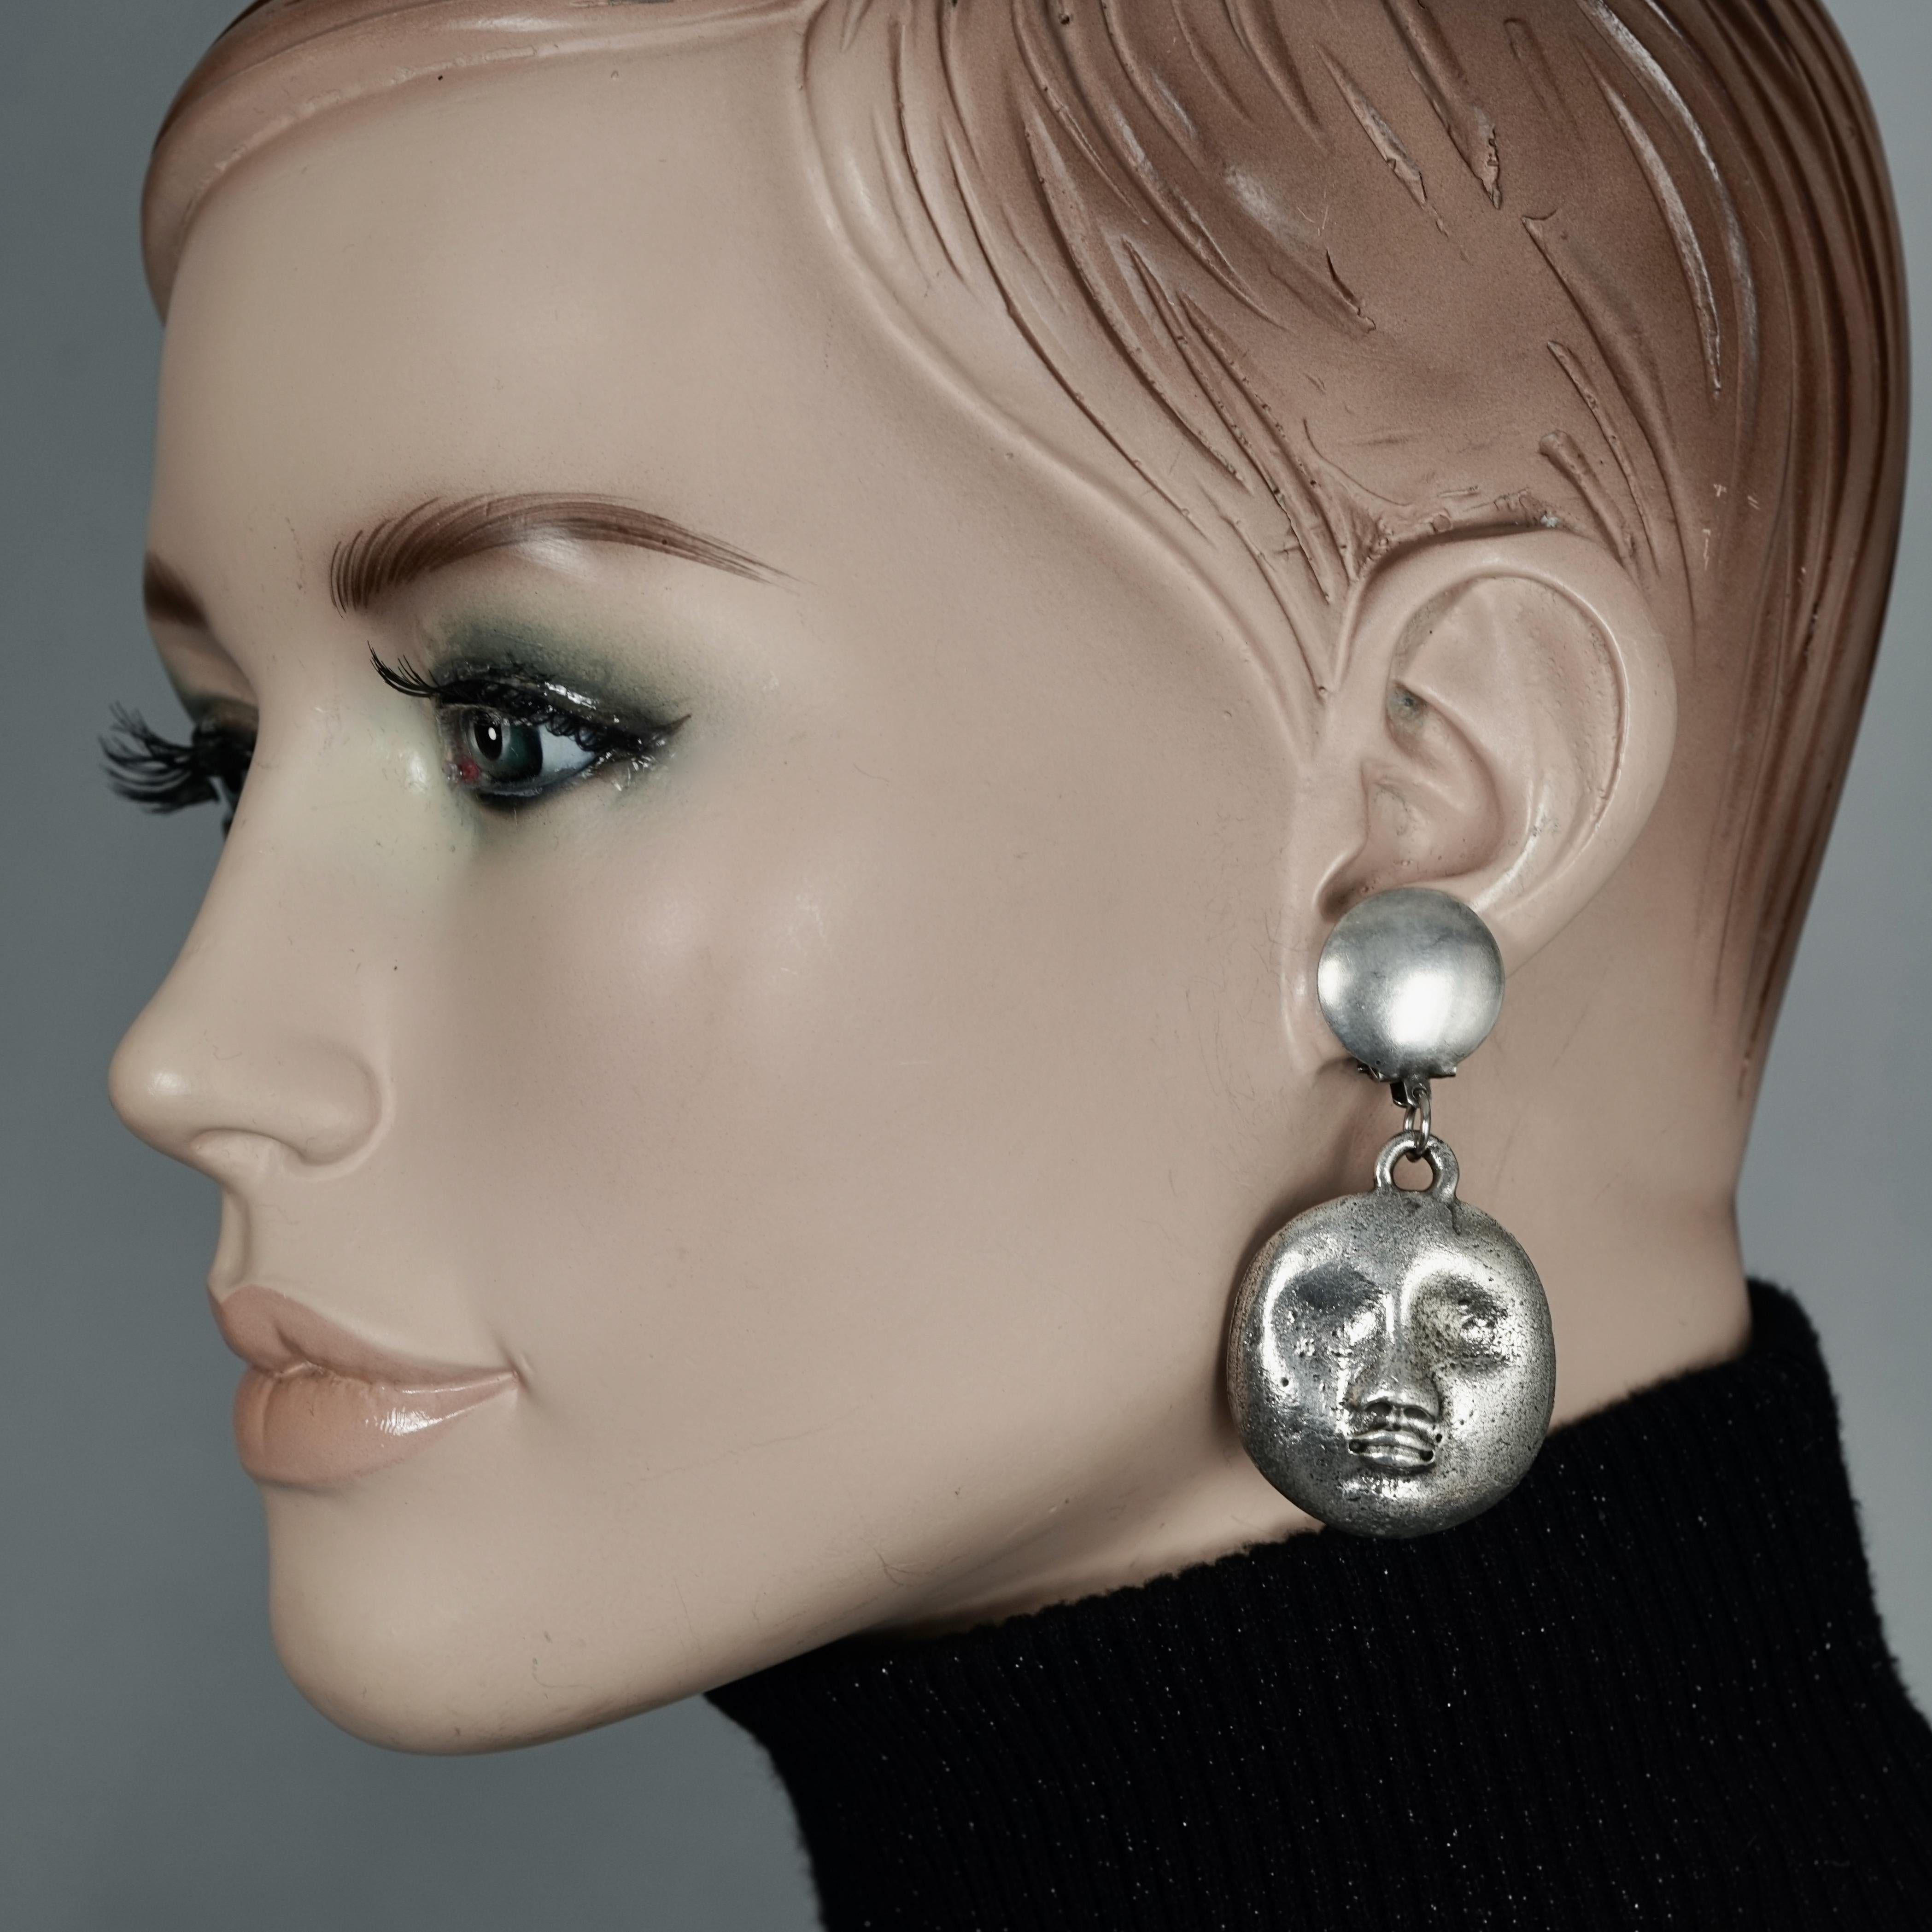 Vintage KENZO PARIS Sculptured Face Dangling Earrings

Measurements:
Height: 2.44 inches (6.2 cm)
Width: 1.26 inches (3.2 cm)
Weight per Earring: 11 grams

Features:
- 100% Authentic KENZO PARIS.
- Sculptured face dangling earrings.
- Silver tone